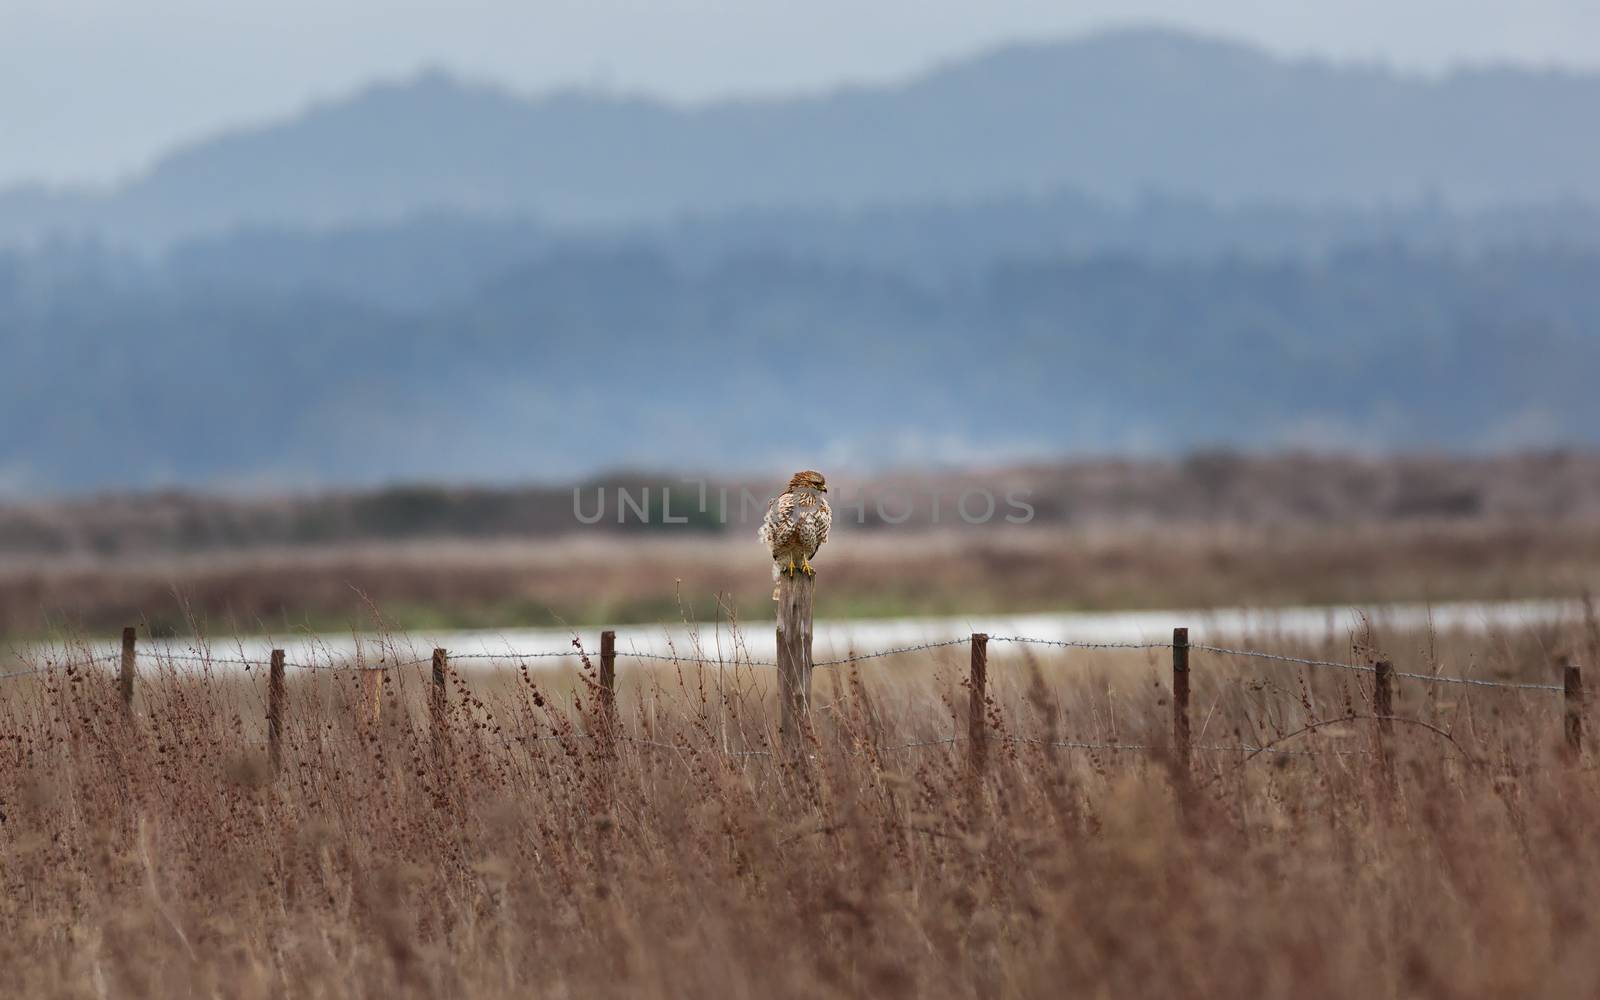 Hawk Perched on a Fence Post, Rural Landscape by backyard_photography